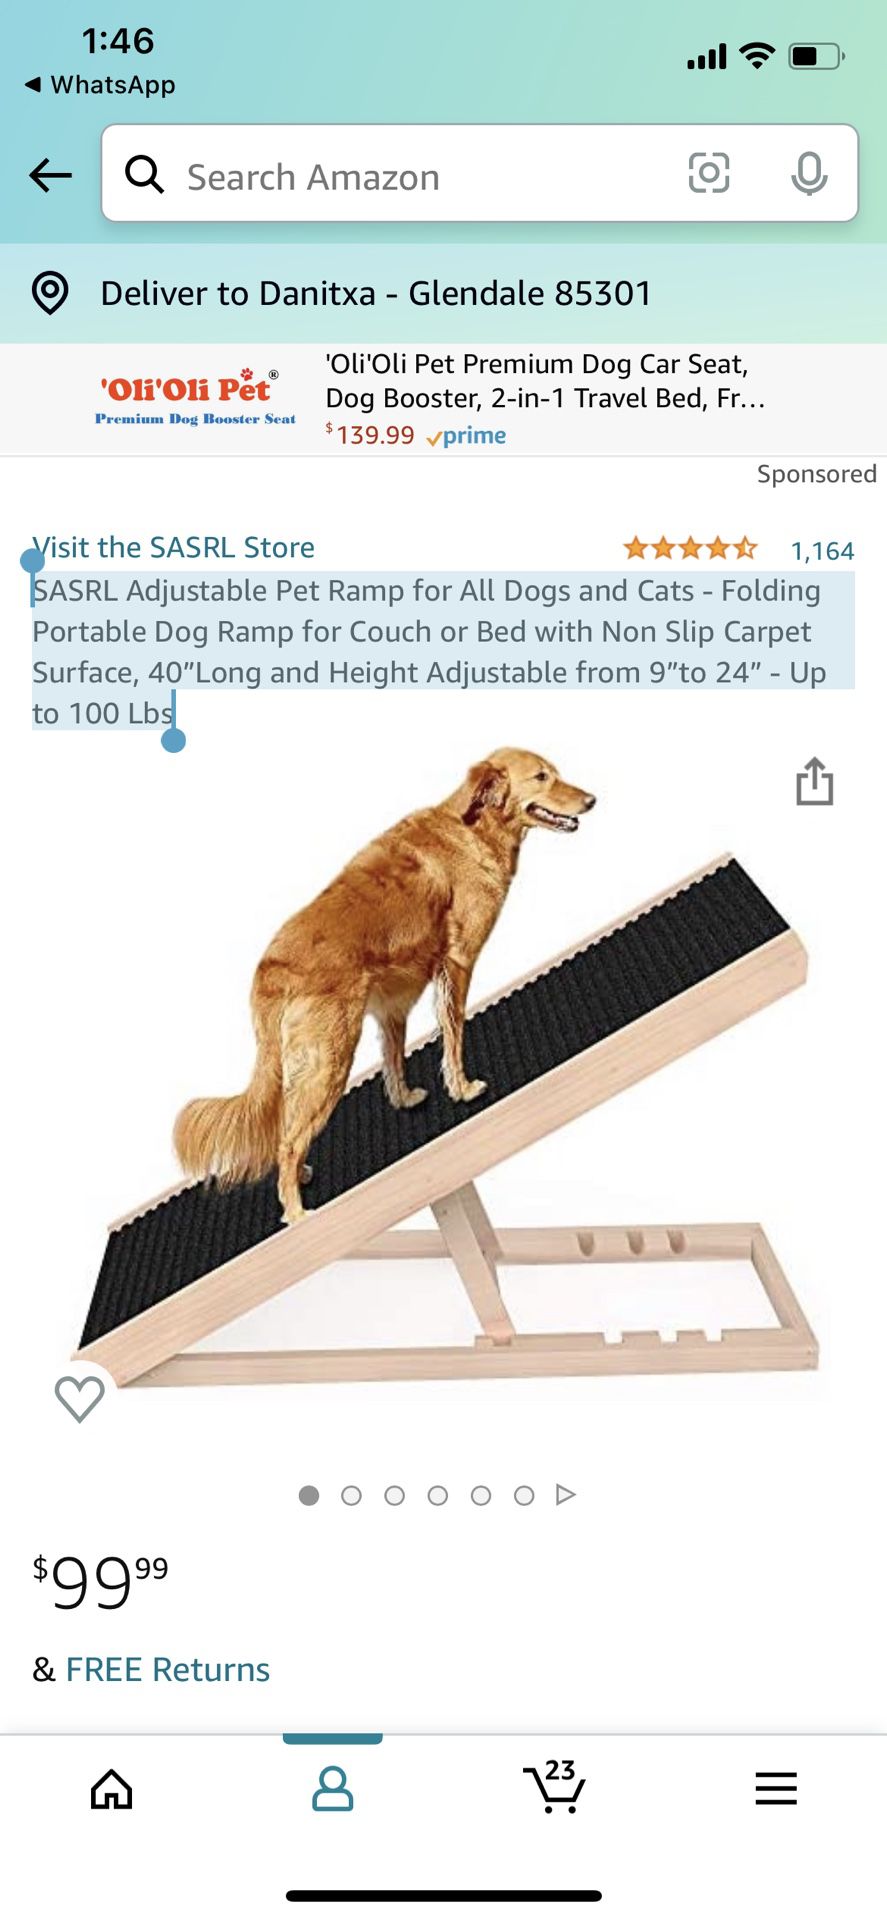 SASRL Adjustable Pet Ramp for All Dogs and Cats - Folding Portable Dog Ramp for Couch or Bed with Non Slip Carpet Surface, 40”Long and Height Adjustab